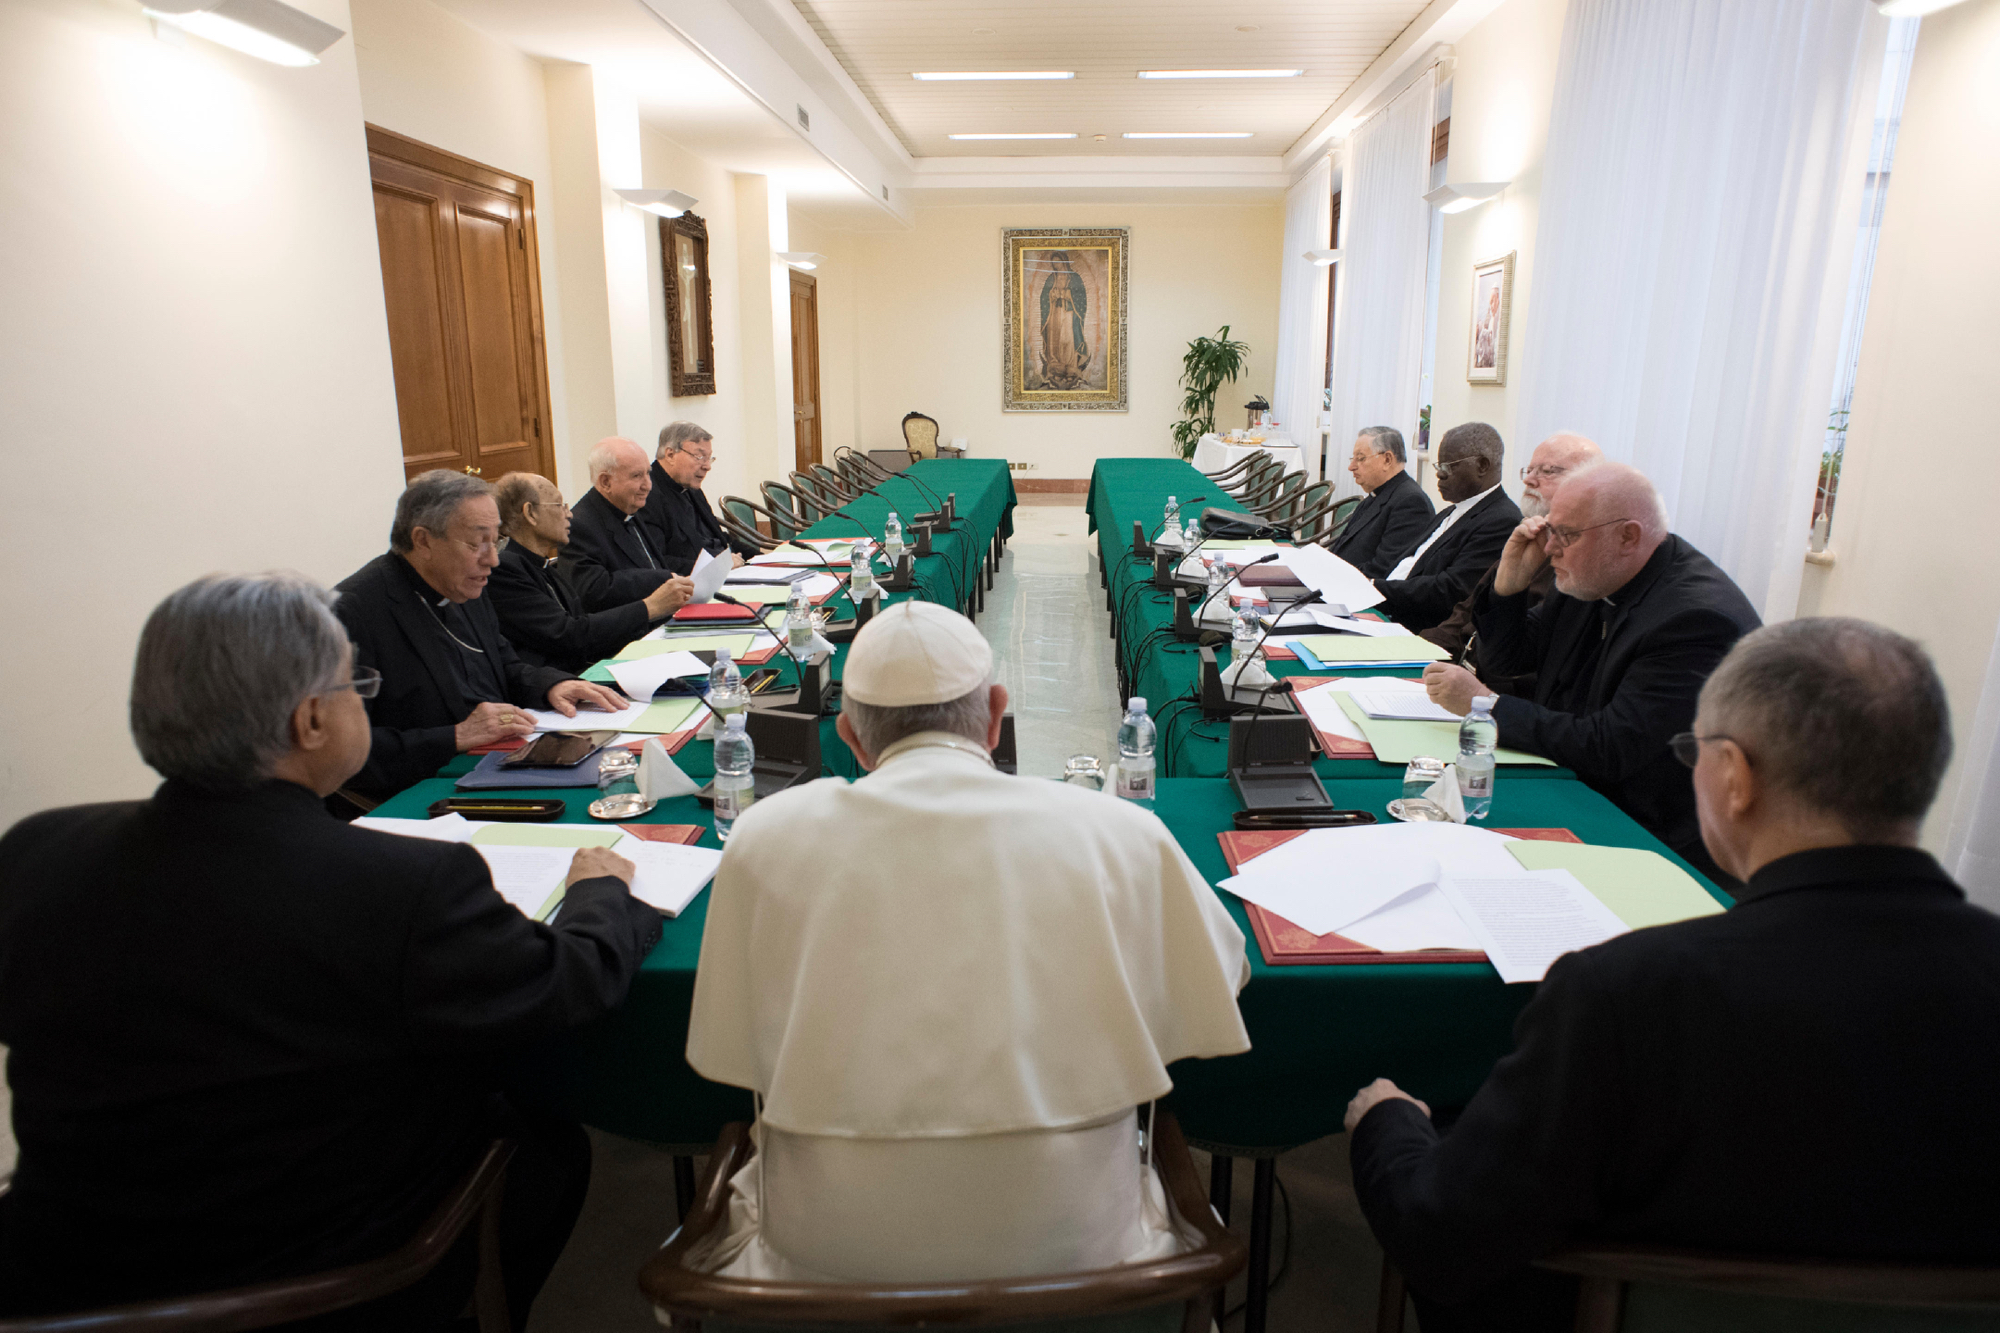 C9 progress report shows 'guiding principle' of Francis' reforms is mission focussed church  